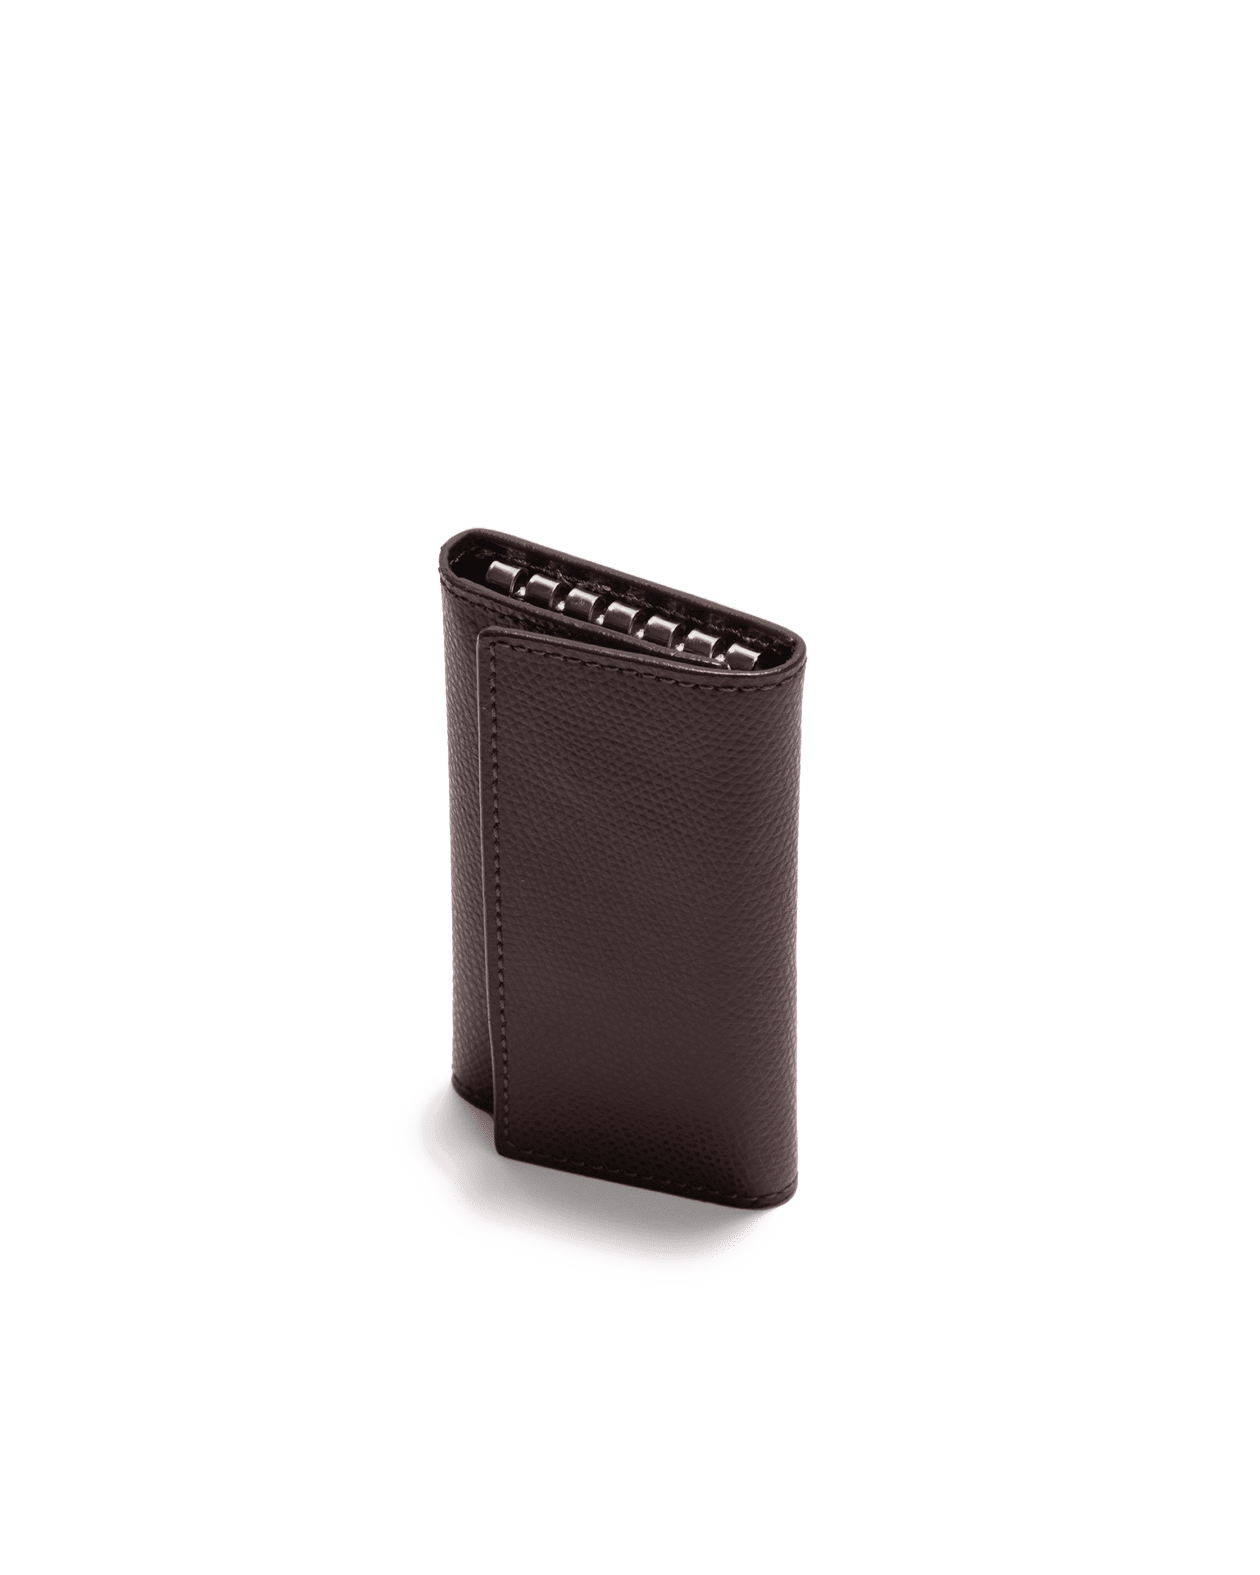 Key Holder Saffiano Leather Brown